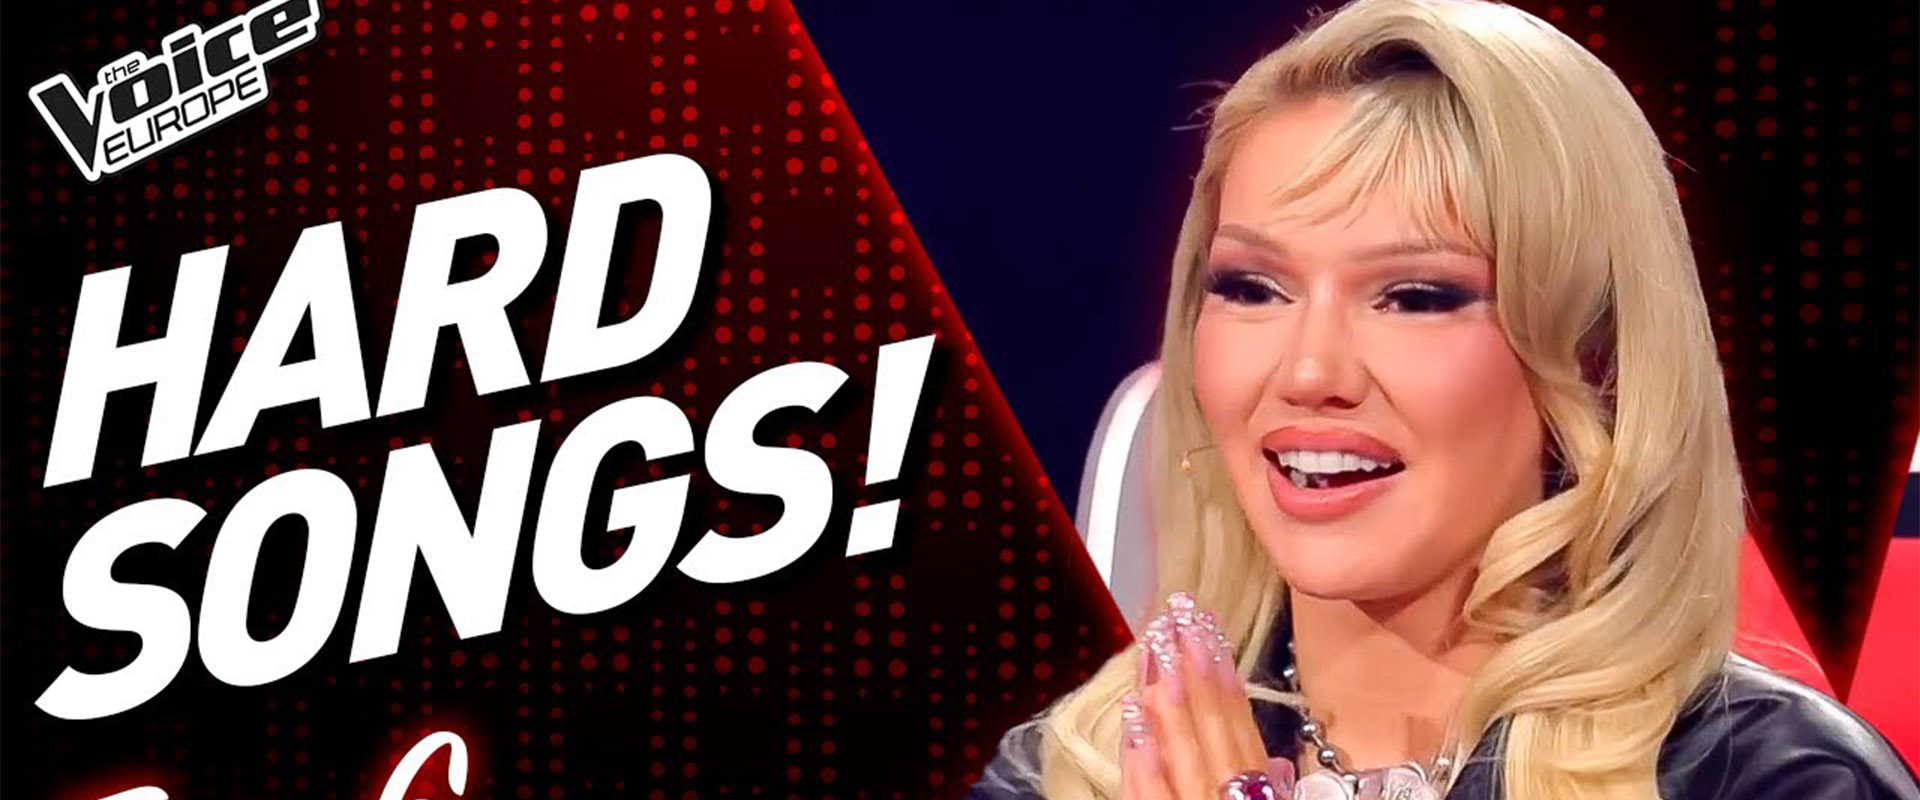 HARDEST SONGS to sing in the Blind Auditions of The Voice! | TOP 6 (Part 4)